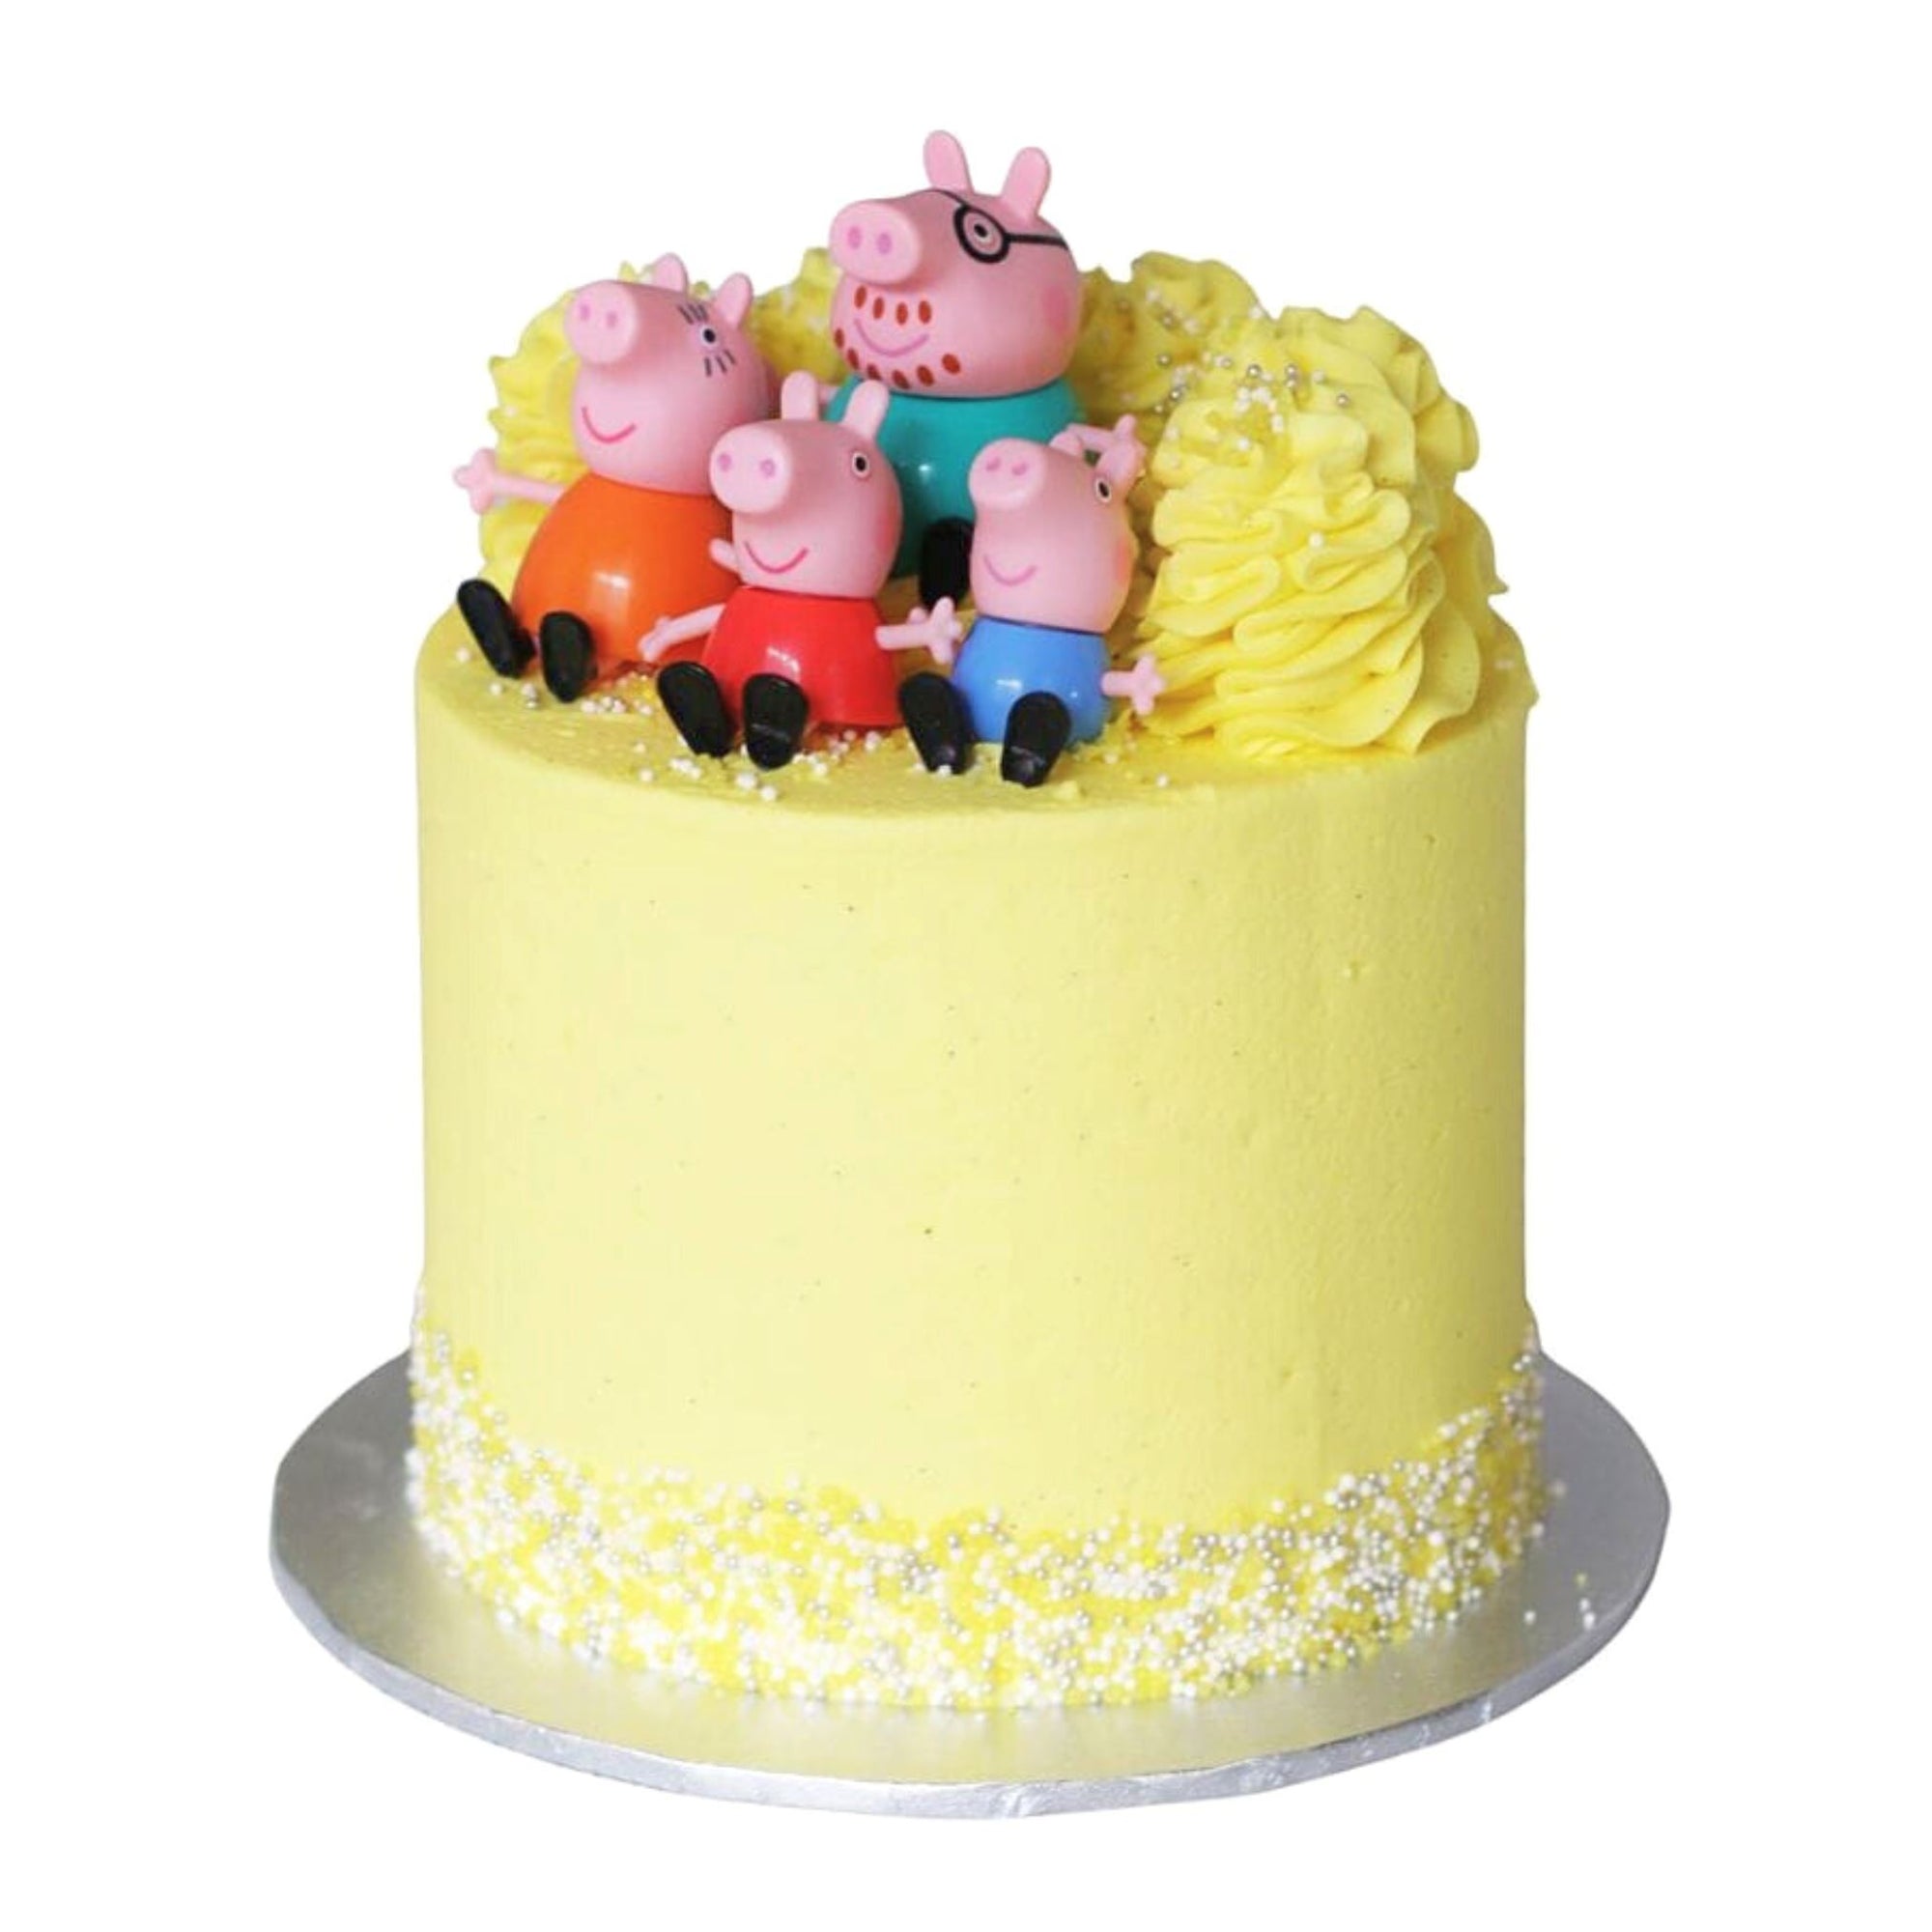 Peppa Pig Cake The Cupcake Queens 